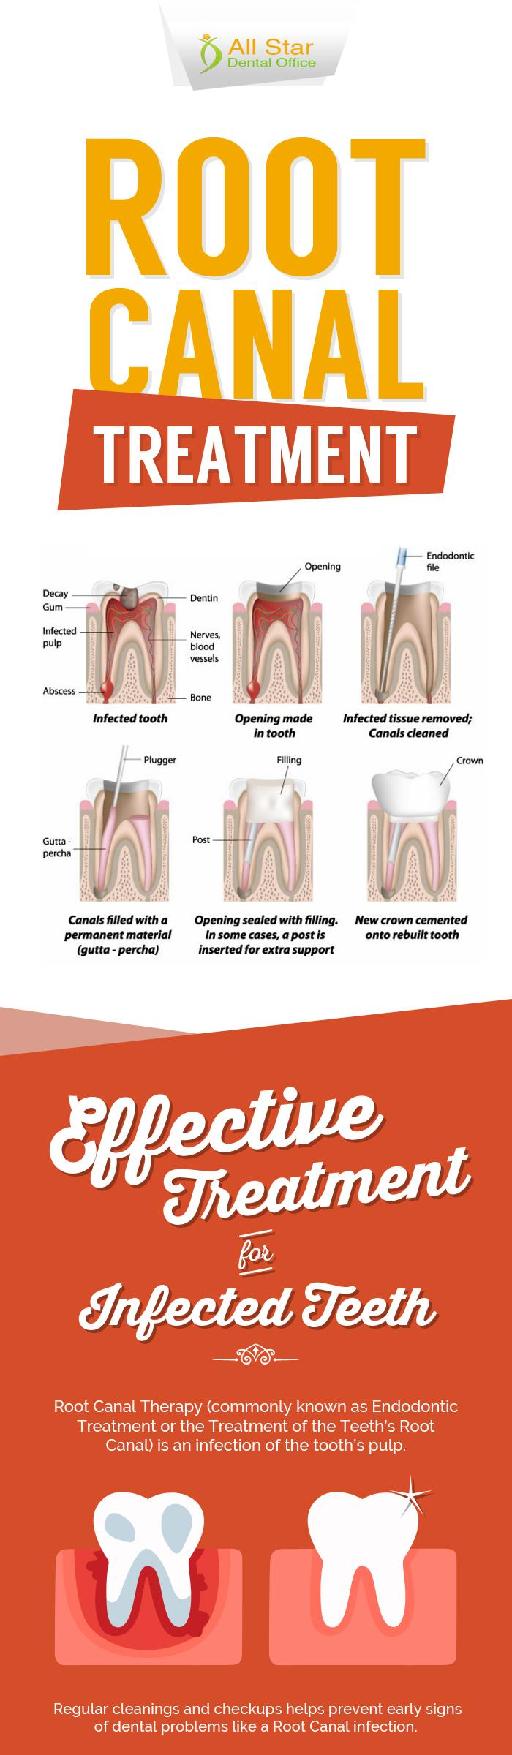 Root Canal Therapy - An Effective Treatment for Infected Teeth